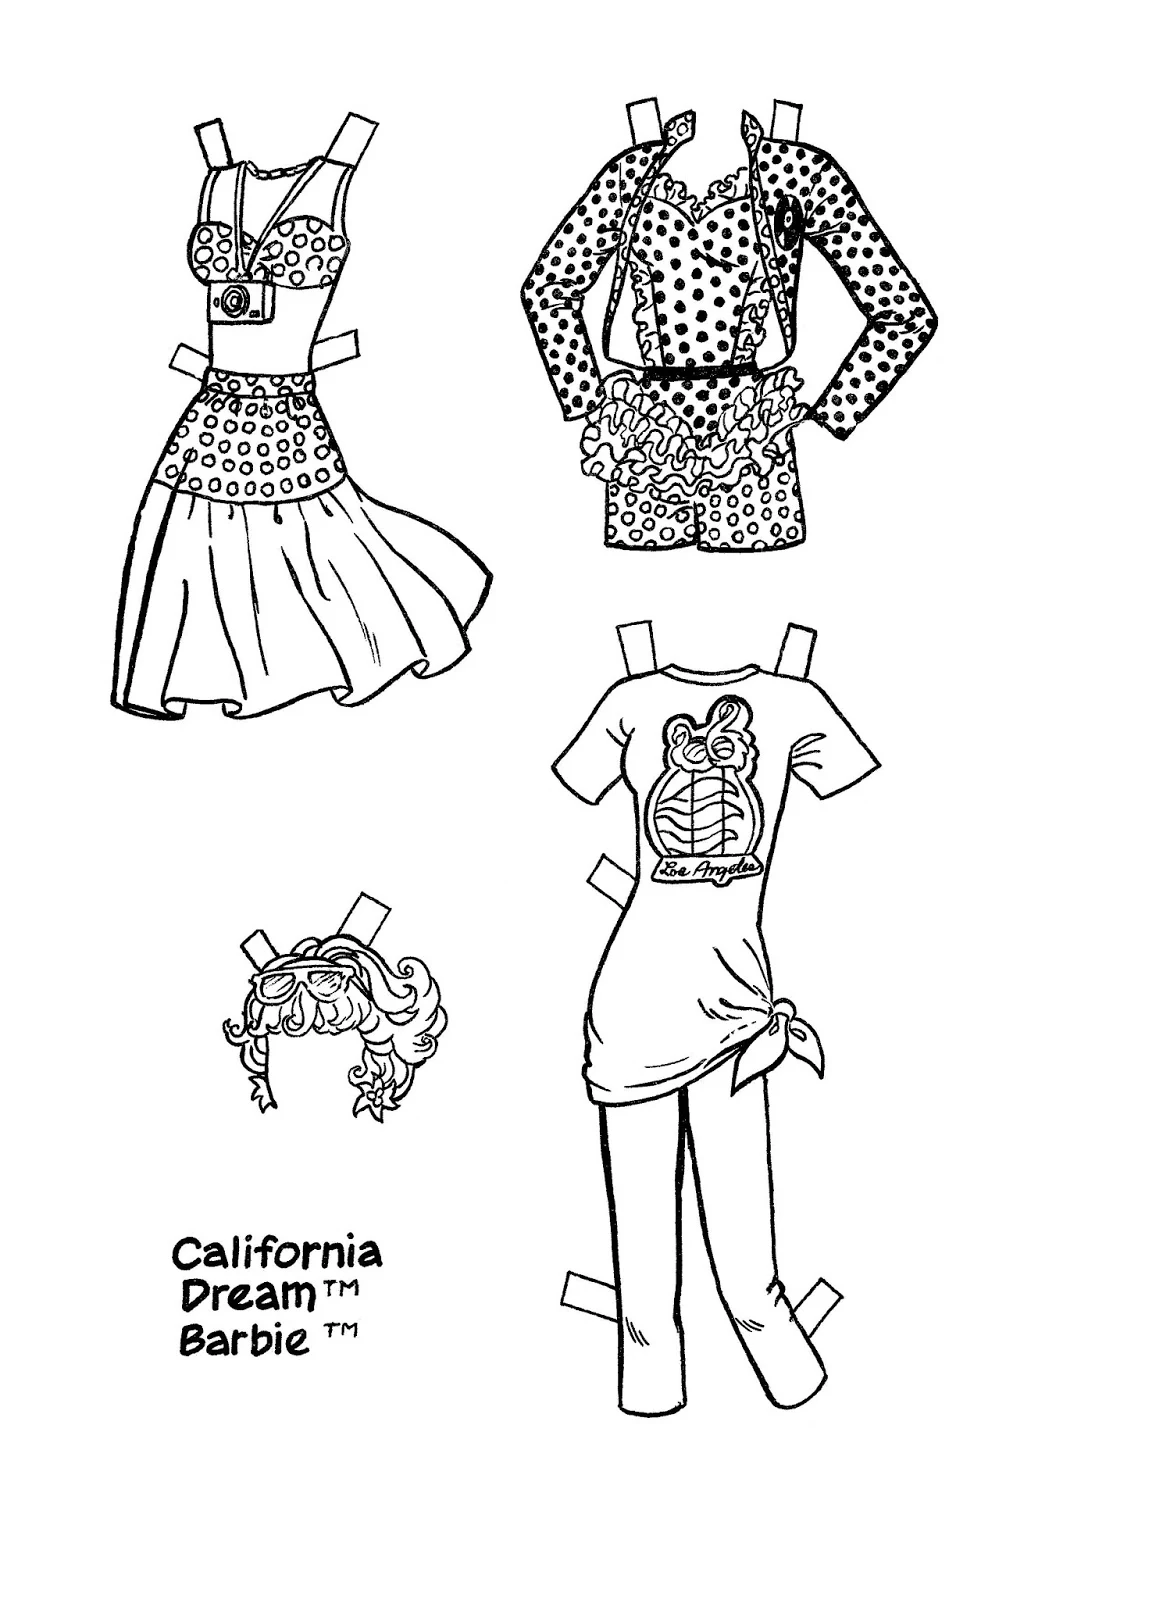 Mostly Paper Dolls Too! BARBIE Paper Doll from Coloring Book